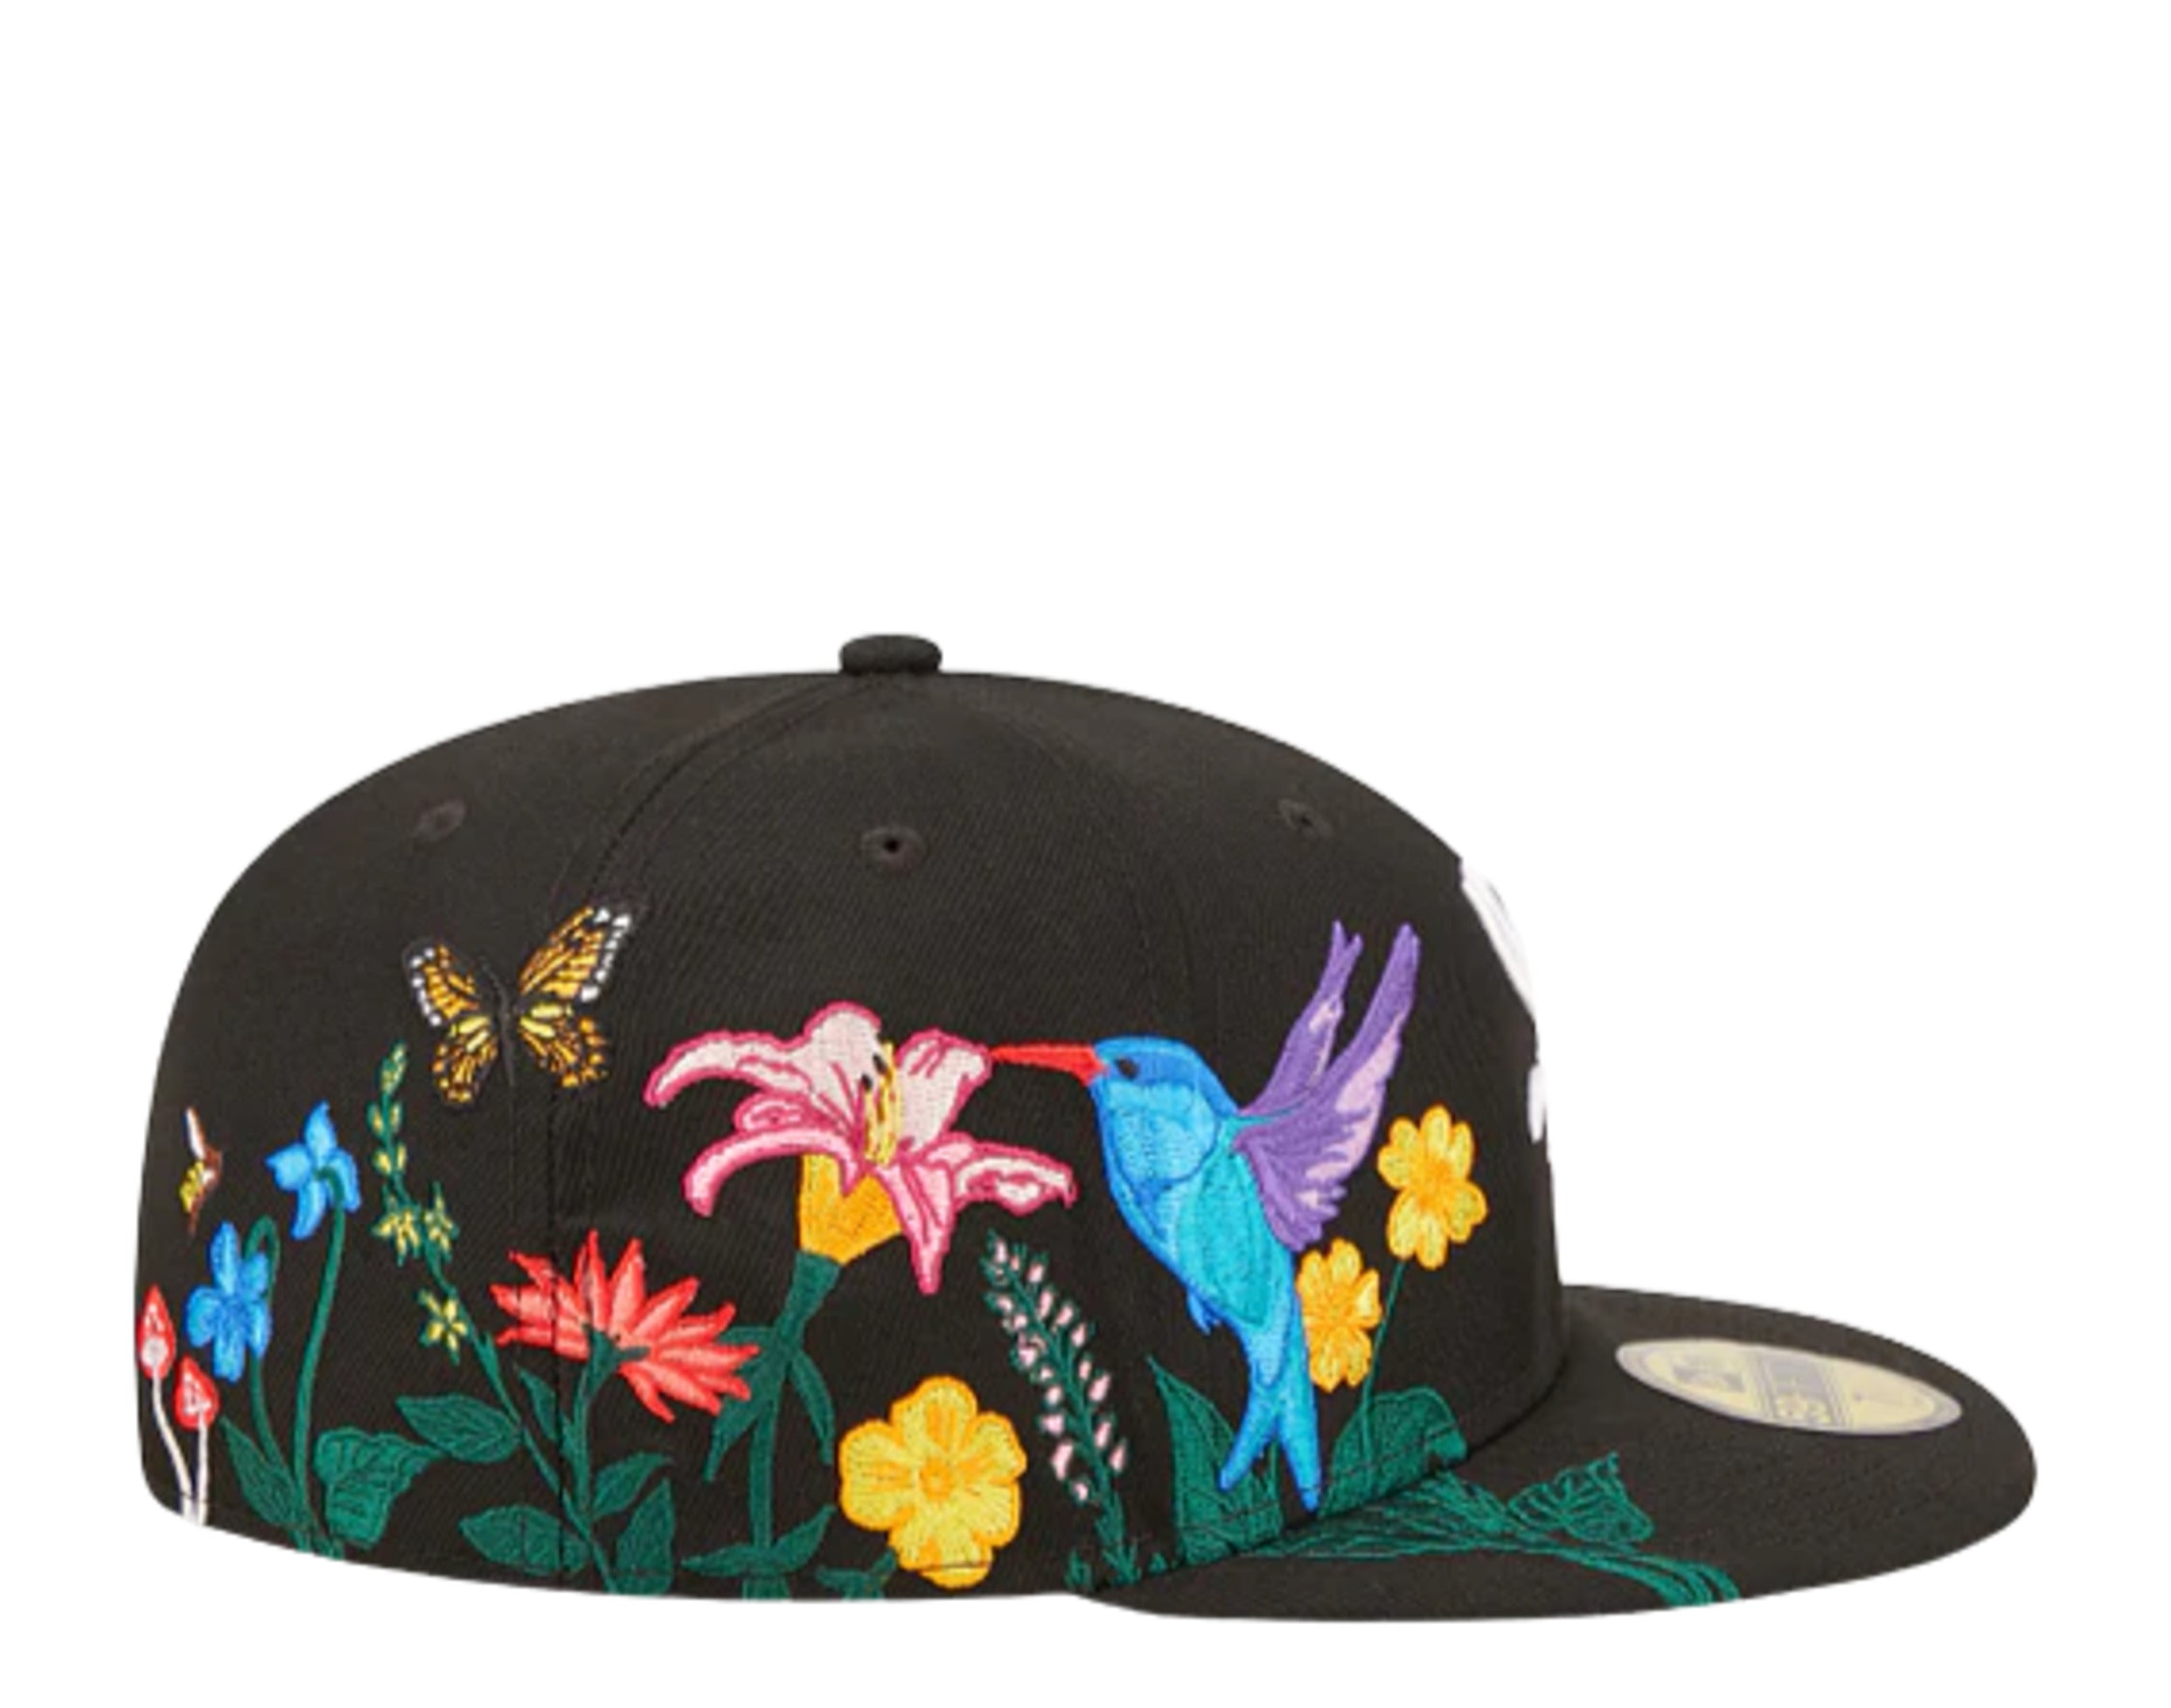 Official New Era Chicago White Sox MLB Vintage Floral Toasted